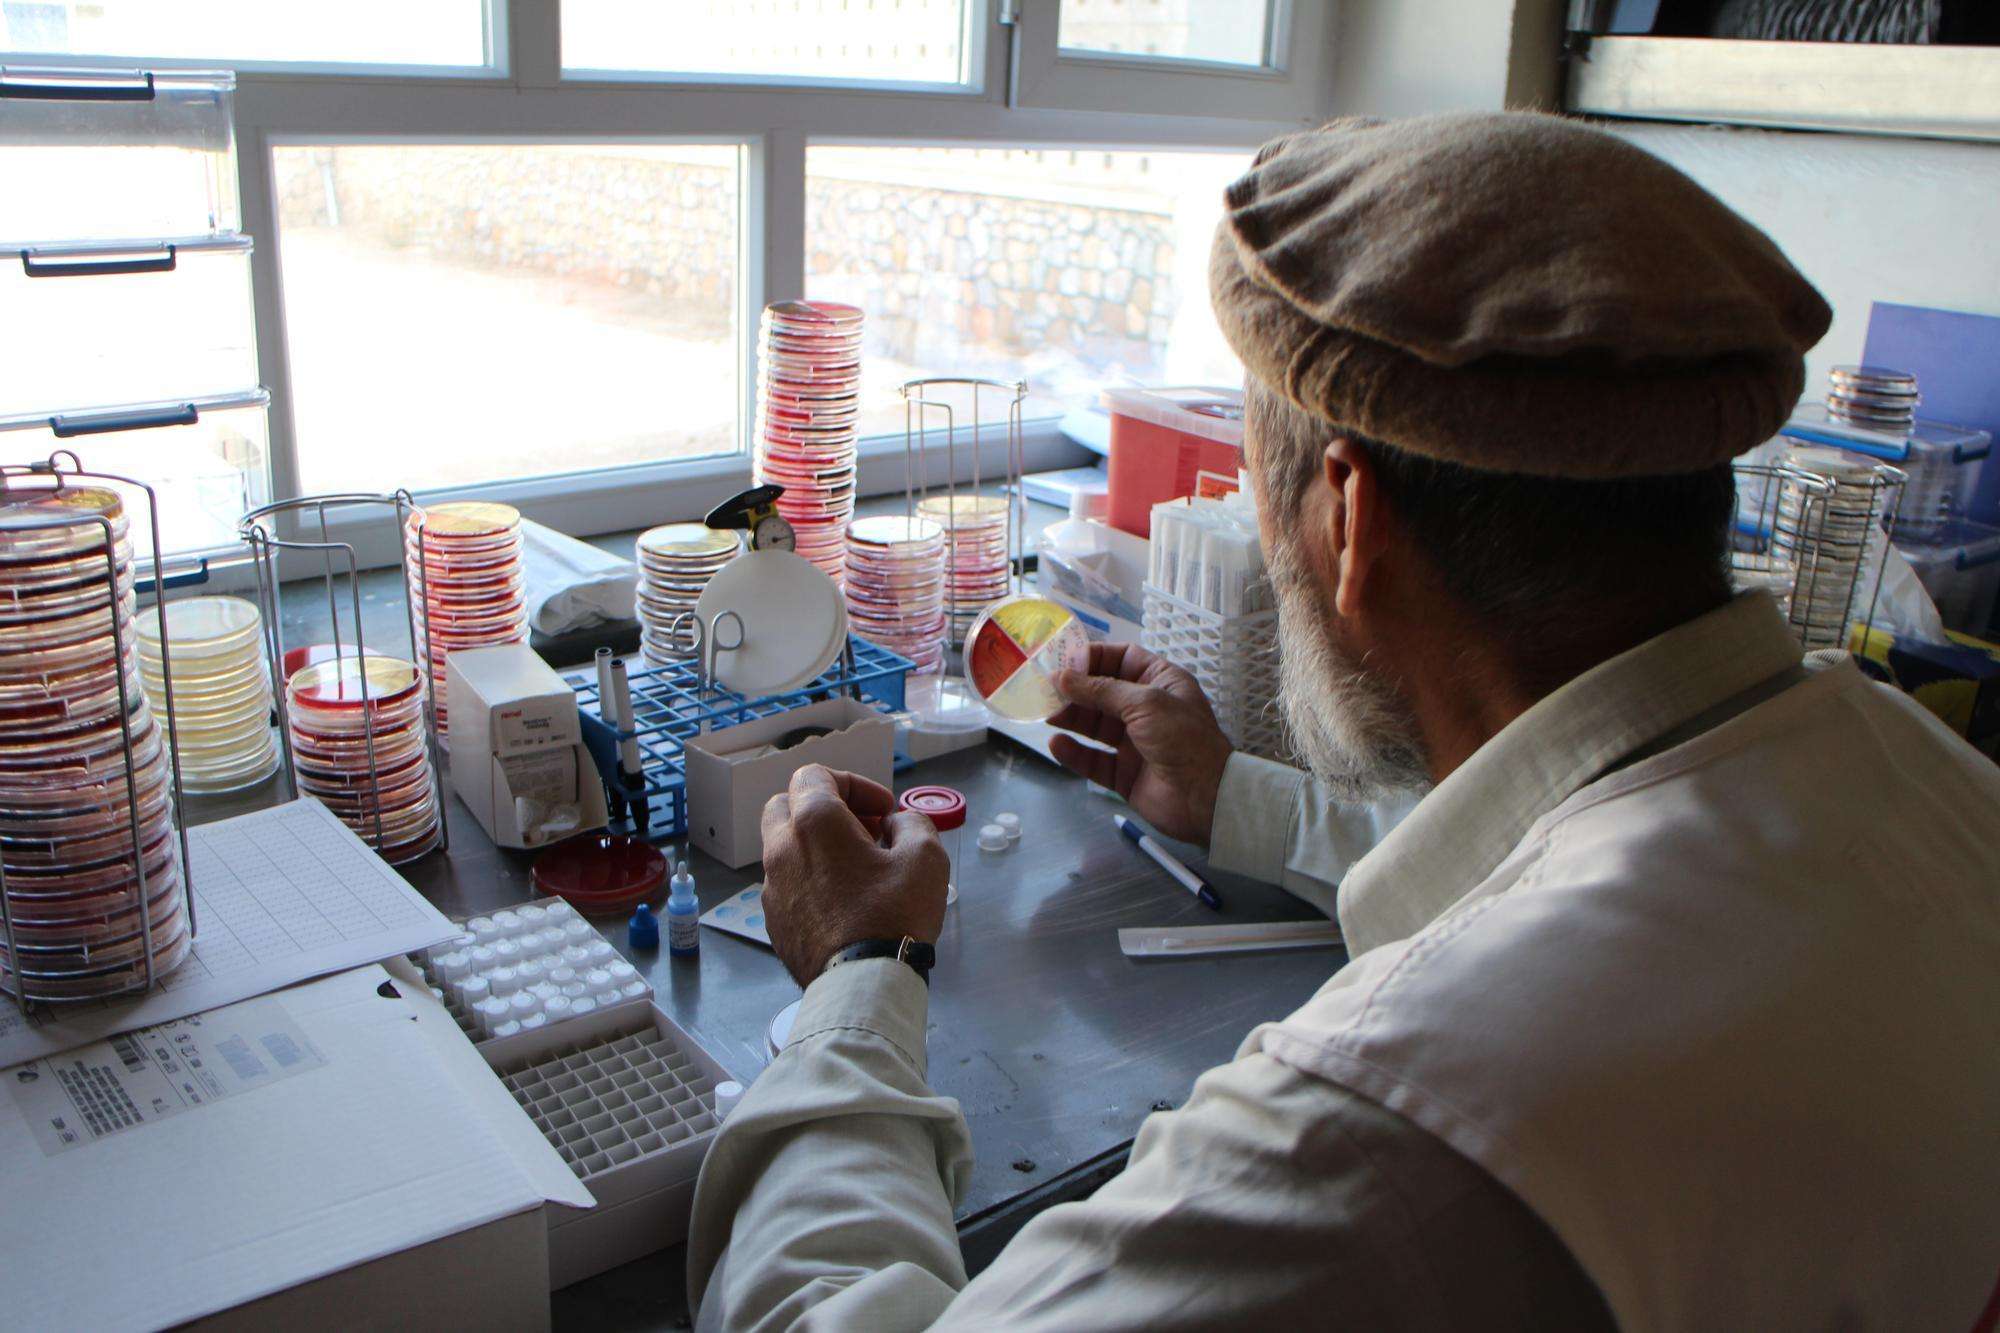 Dr Wardak Abdul Qayoum observes a culture plate to find an interesting bacterial strain in the laboratory in Boost Hospital, Lashkar Gah, Helmand, Afghanistan. 